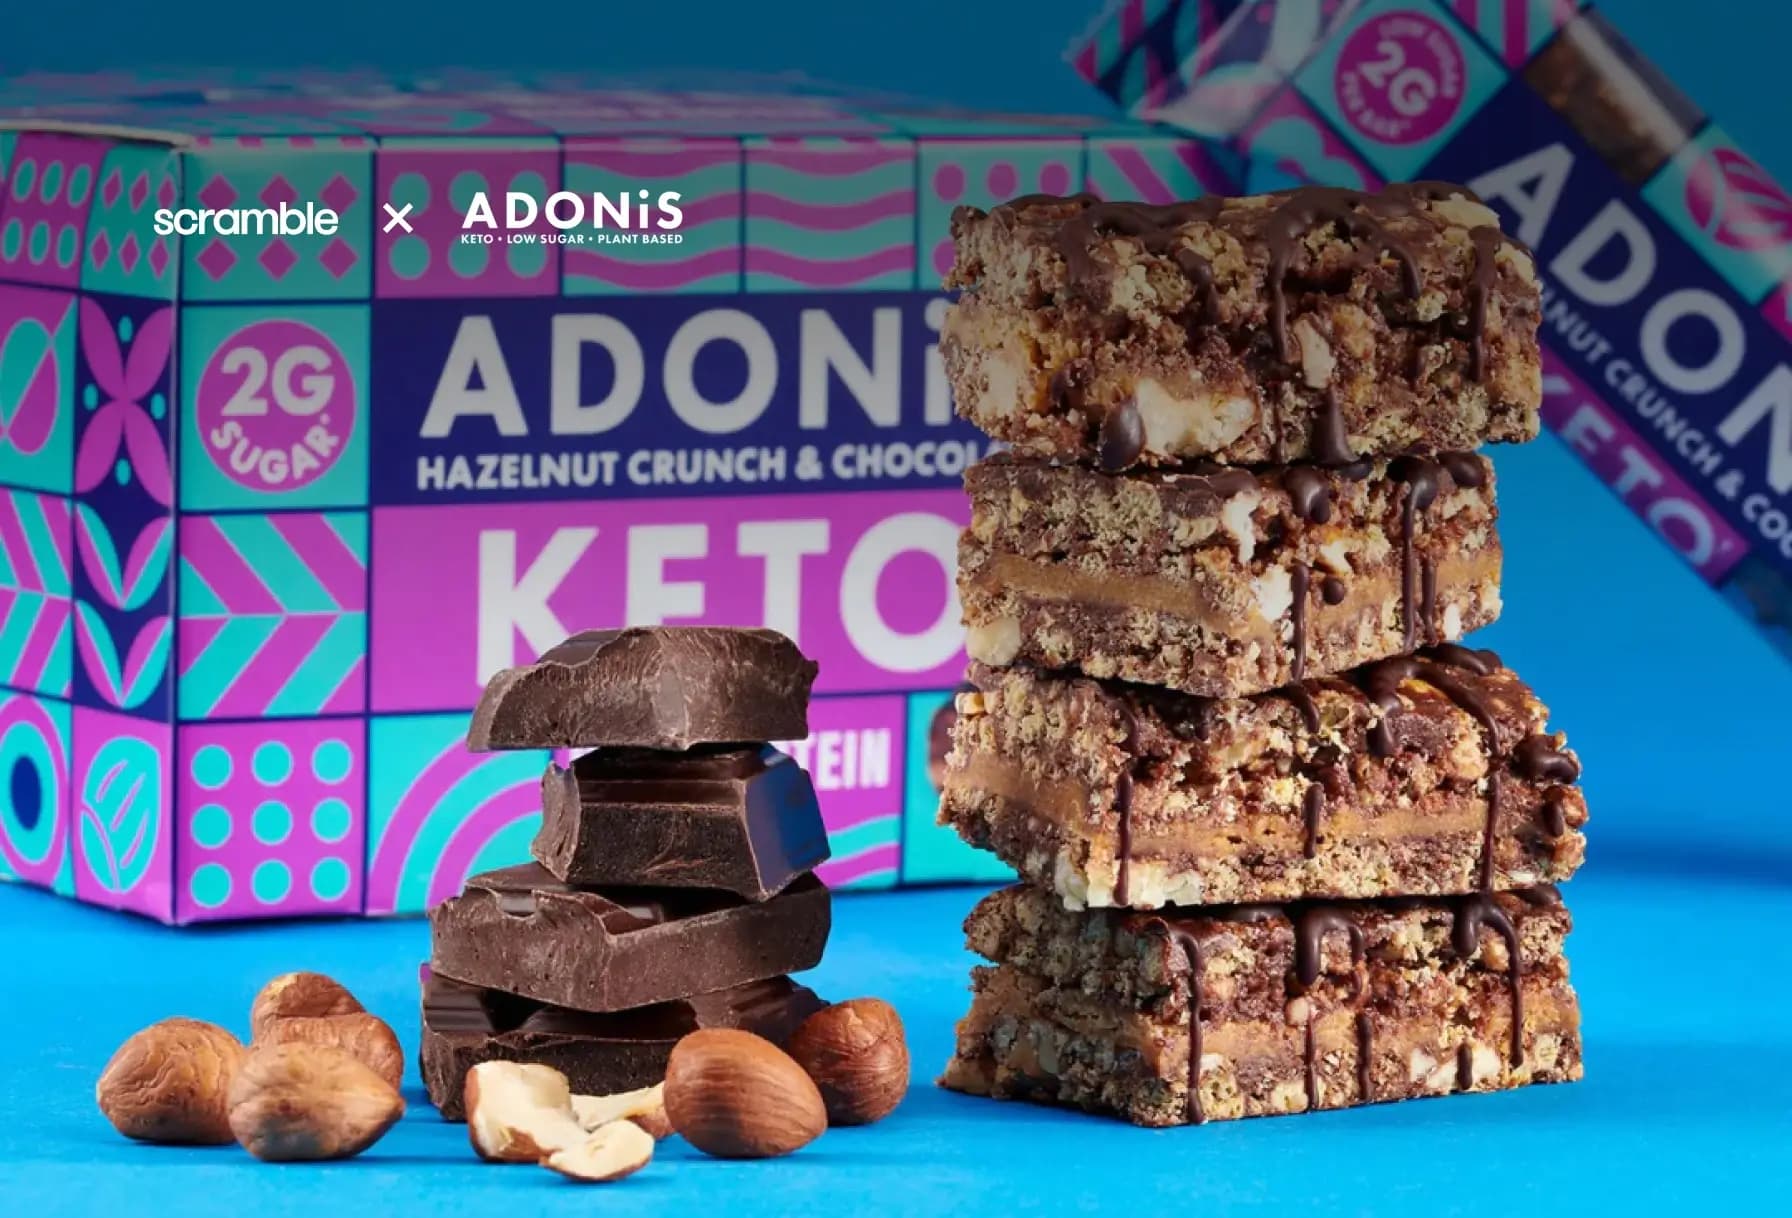 ADONiS: Plant-Based Keto Snacks Designed for the Fast-Paced Life